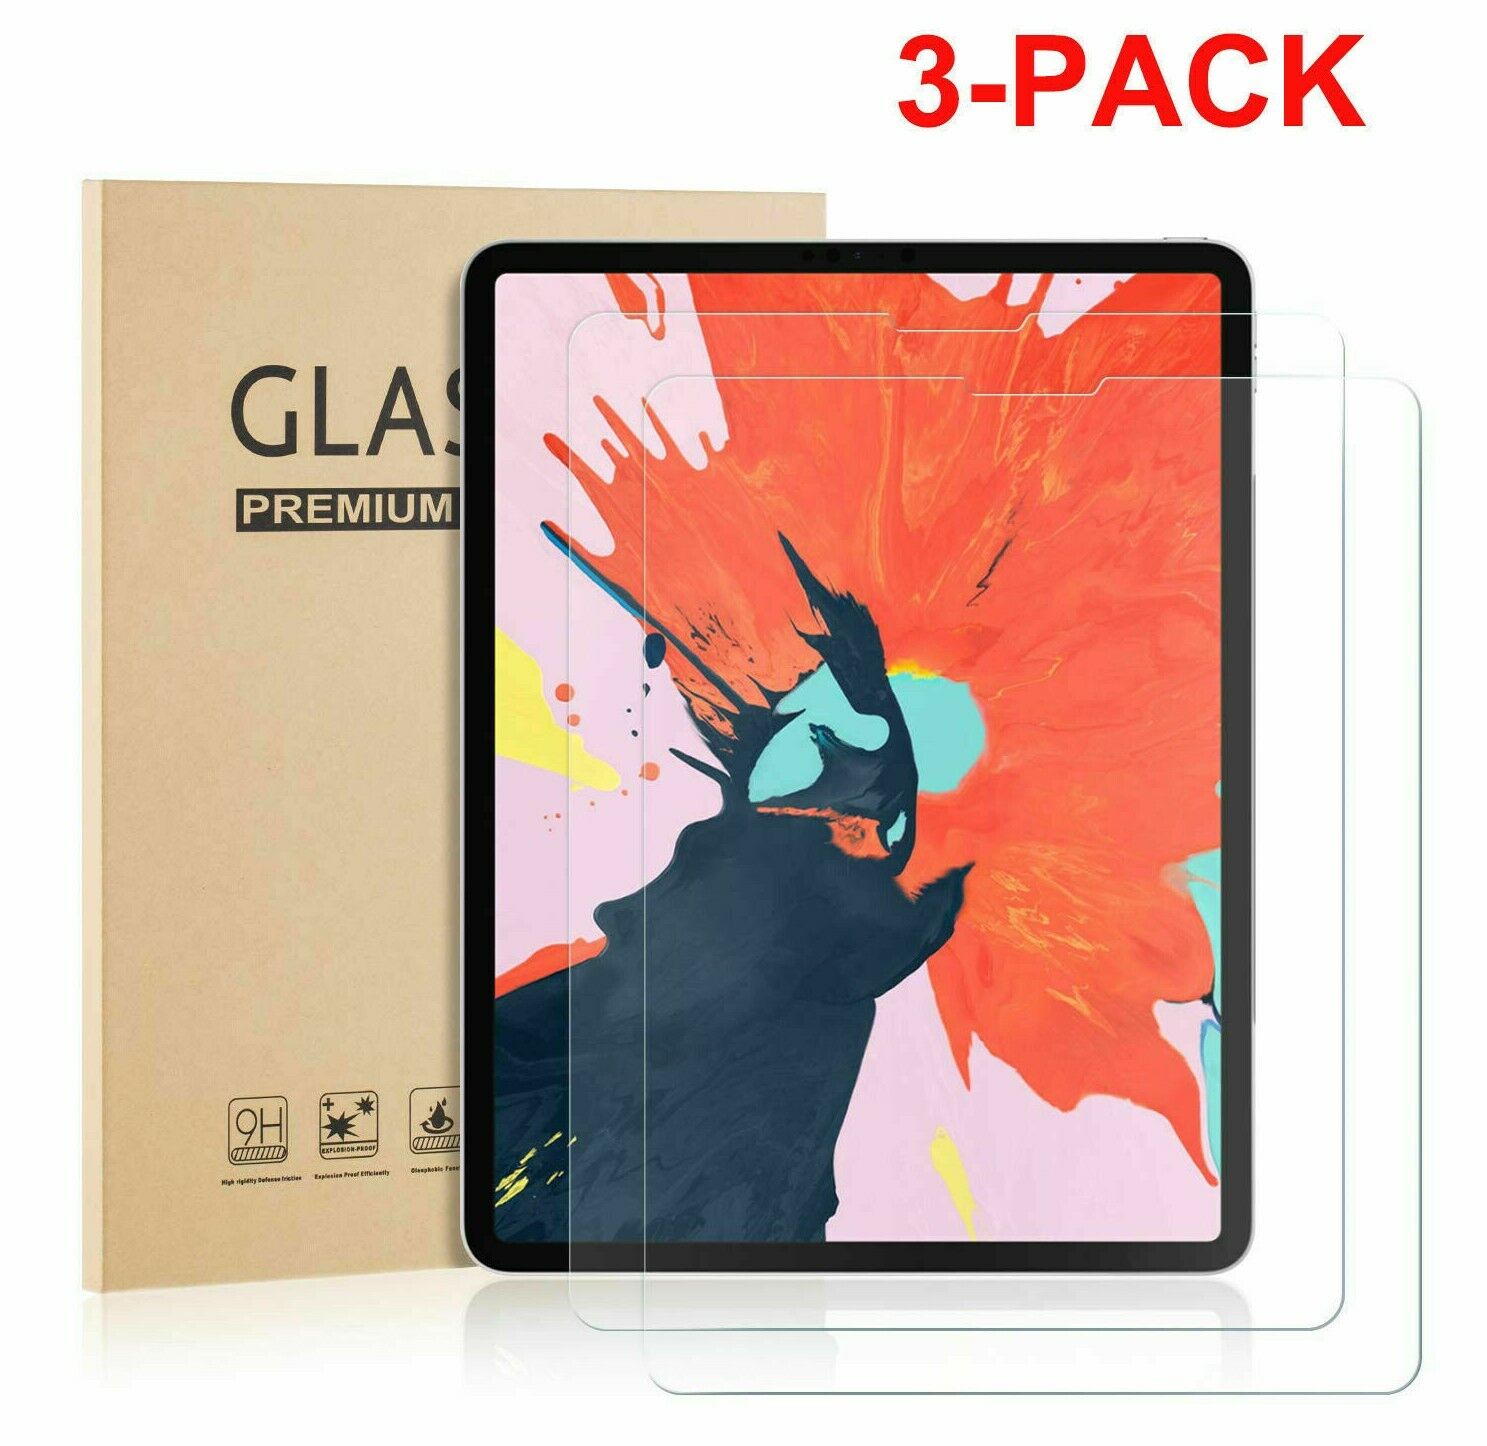 3-Pack Tempered Glass Screen Protector For Apple iPad Pro 11 inch 2020 Model Unbranded Does Not Apply